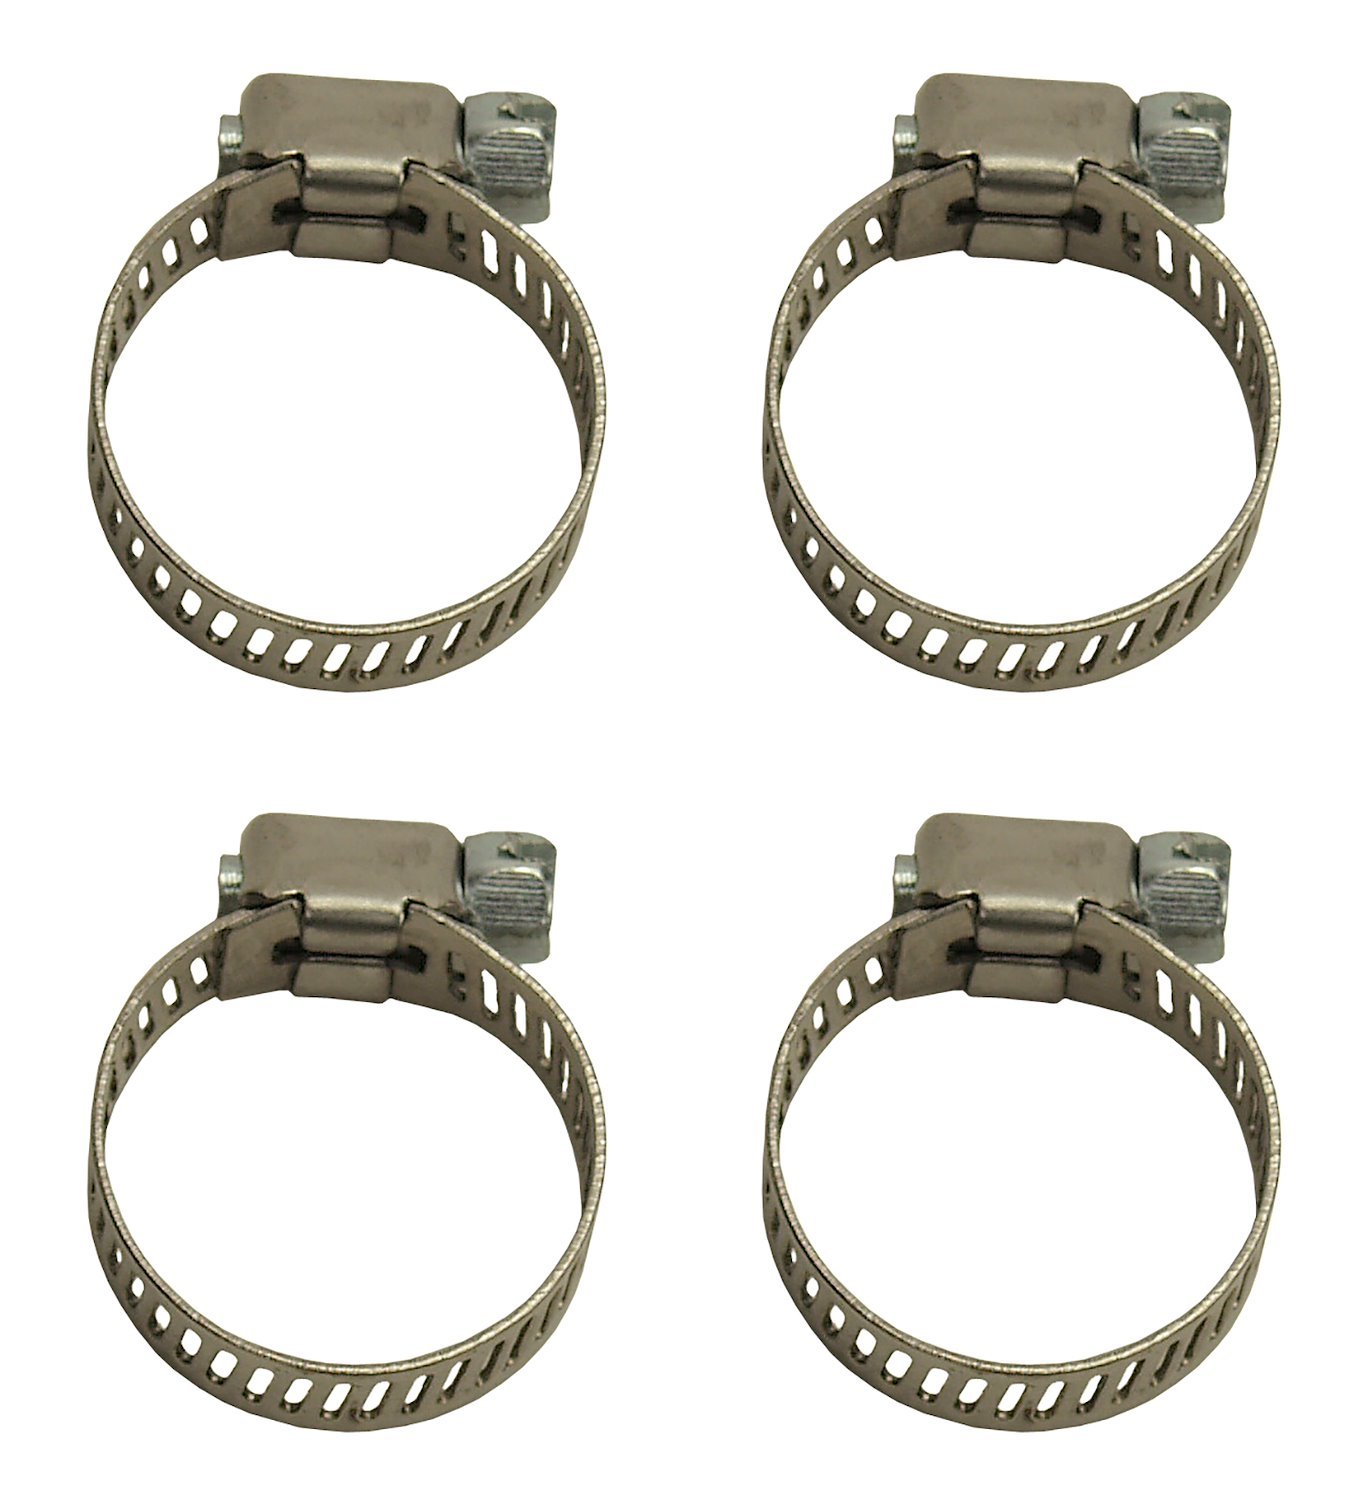 Stainless Steel Hose Clamps Fits hose 5/16" to 1/2"